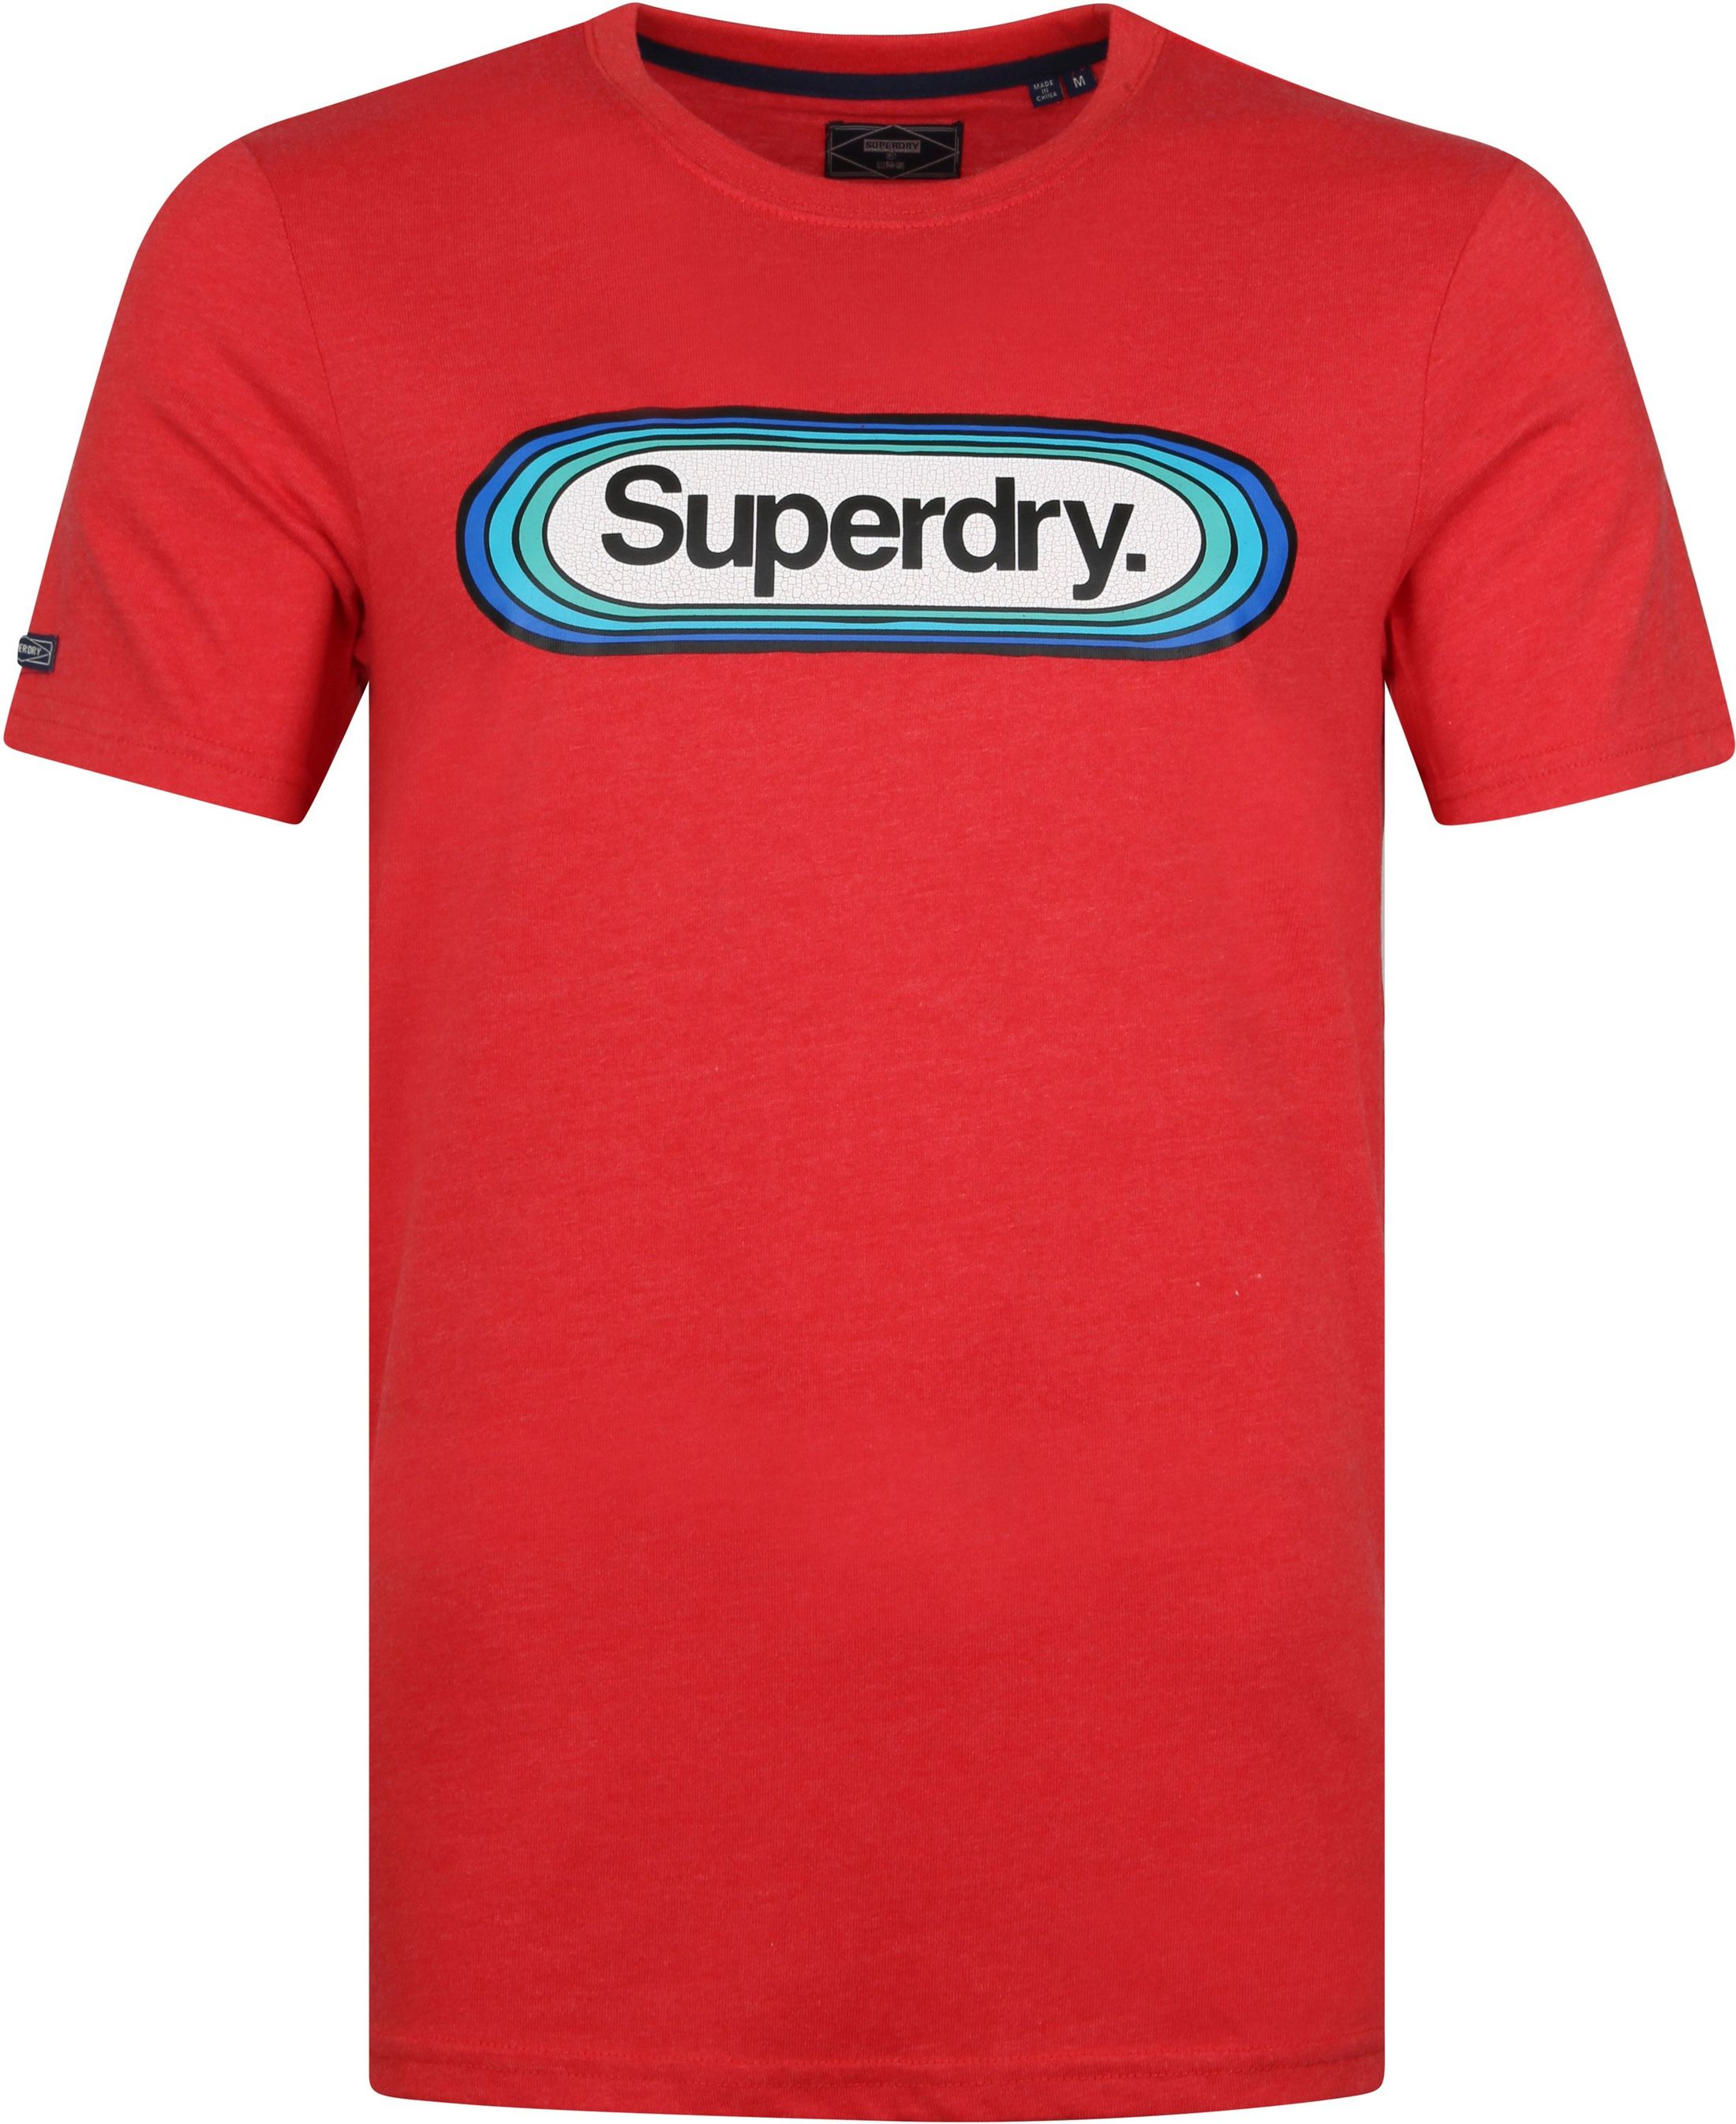 Superdry Classic T Shirt Logo Red size L